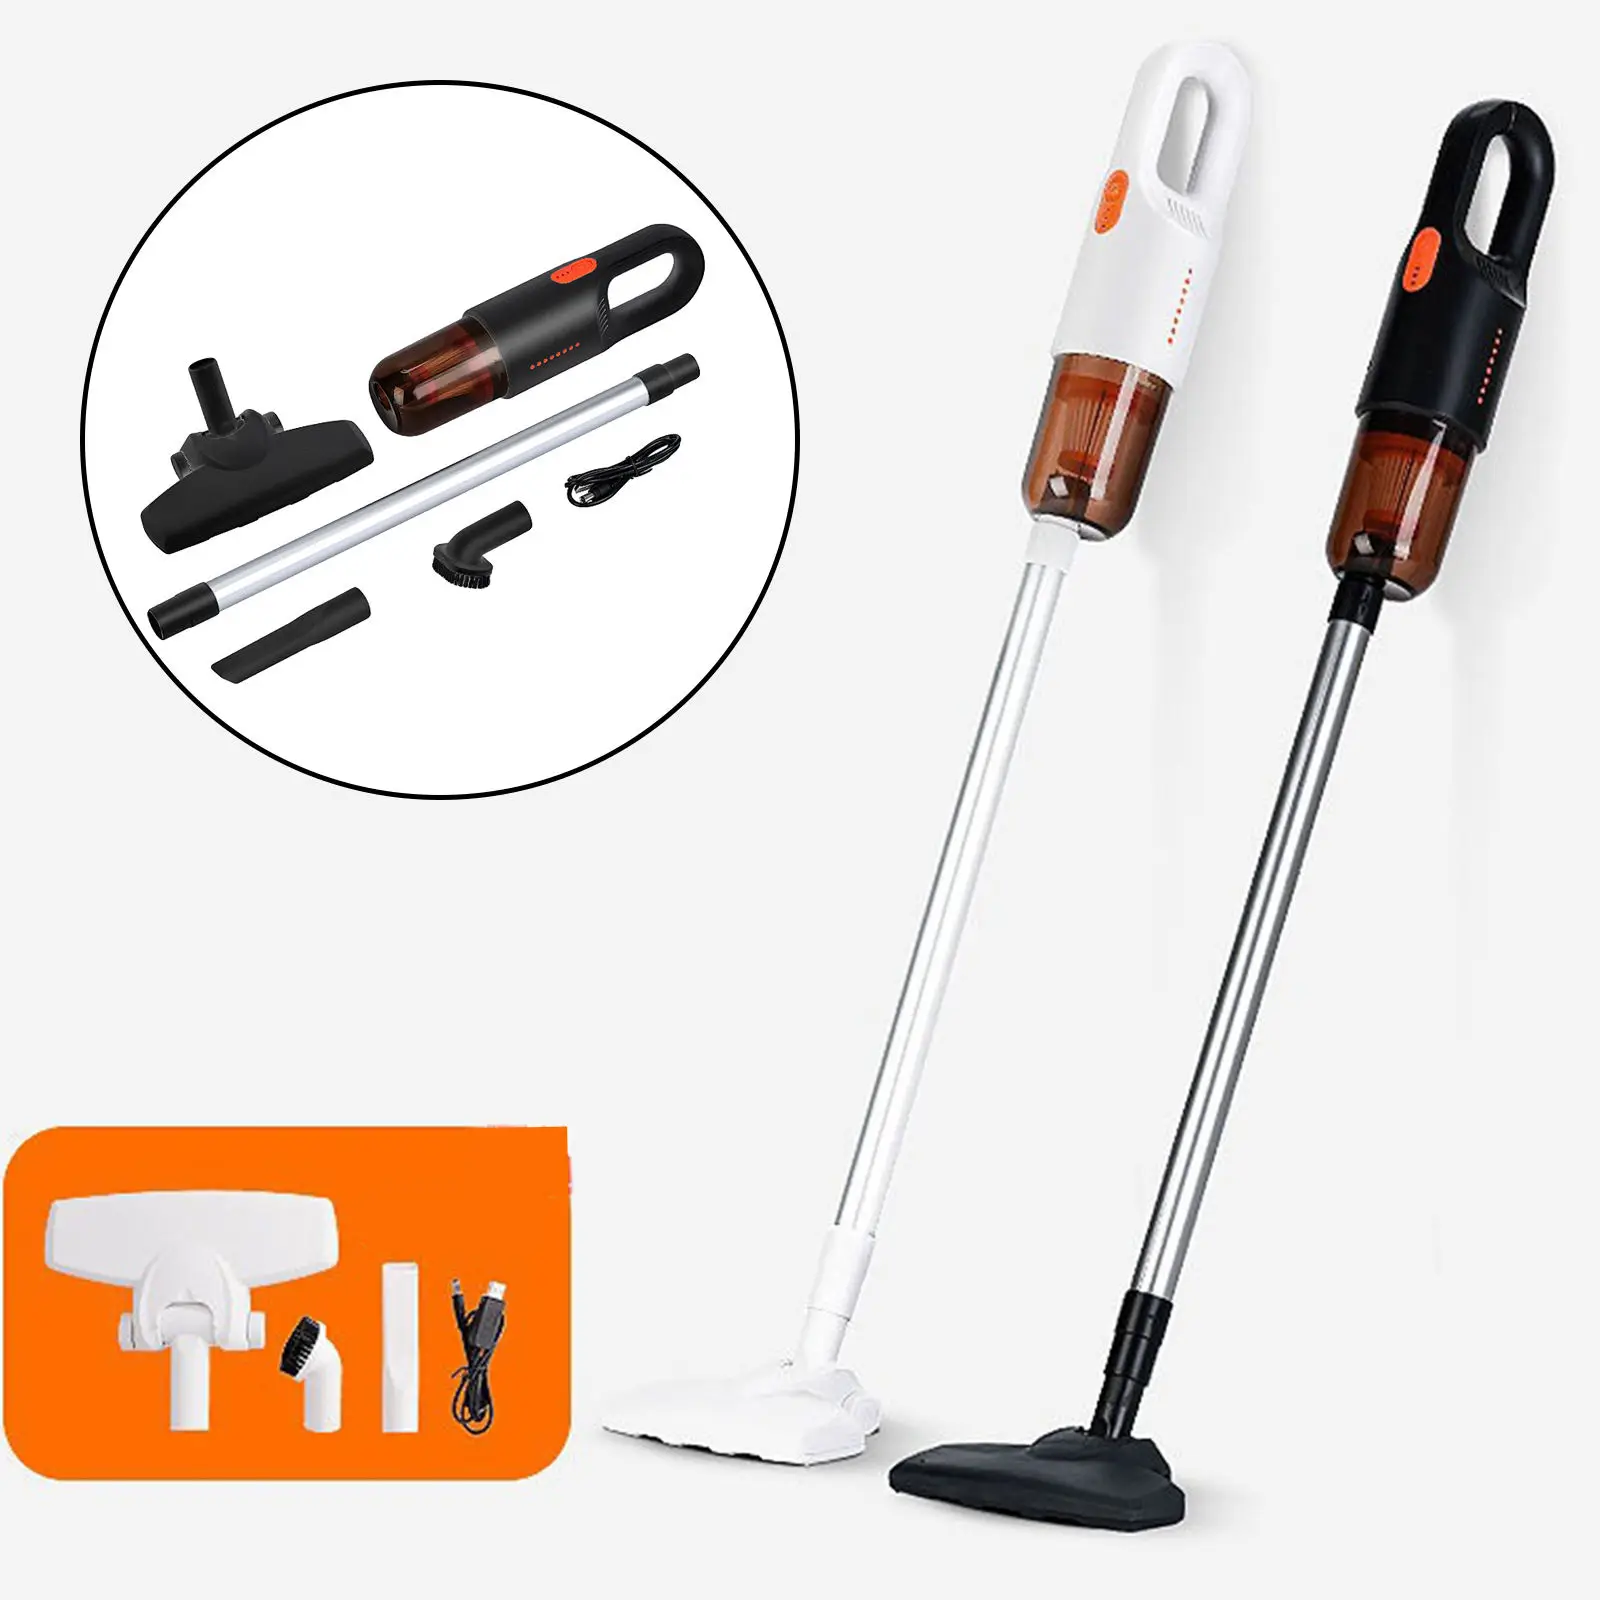 Wireless Vacuum Cleaner Strong Suction High Power 2 in 1 Cleaning Tool for Home Sofa Office Dust Pet Hair